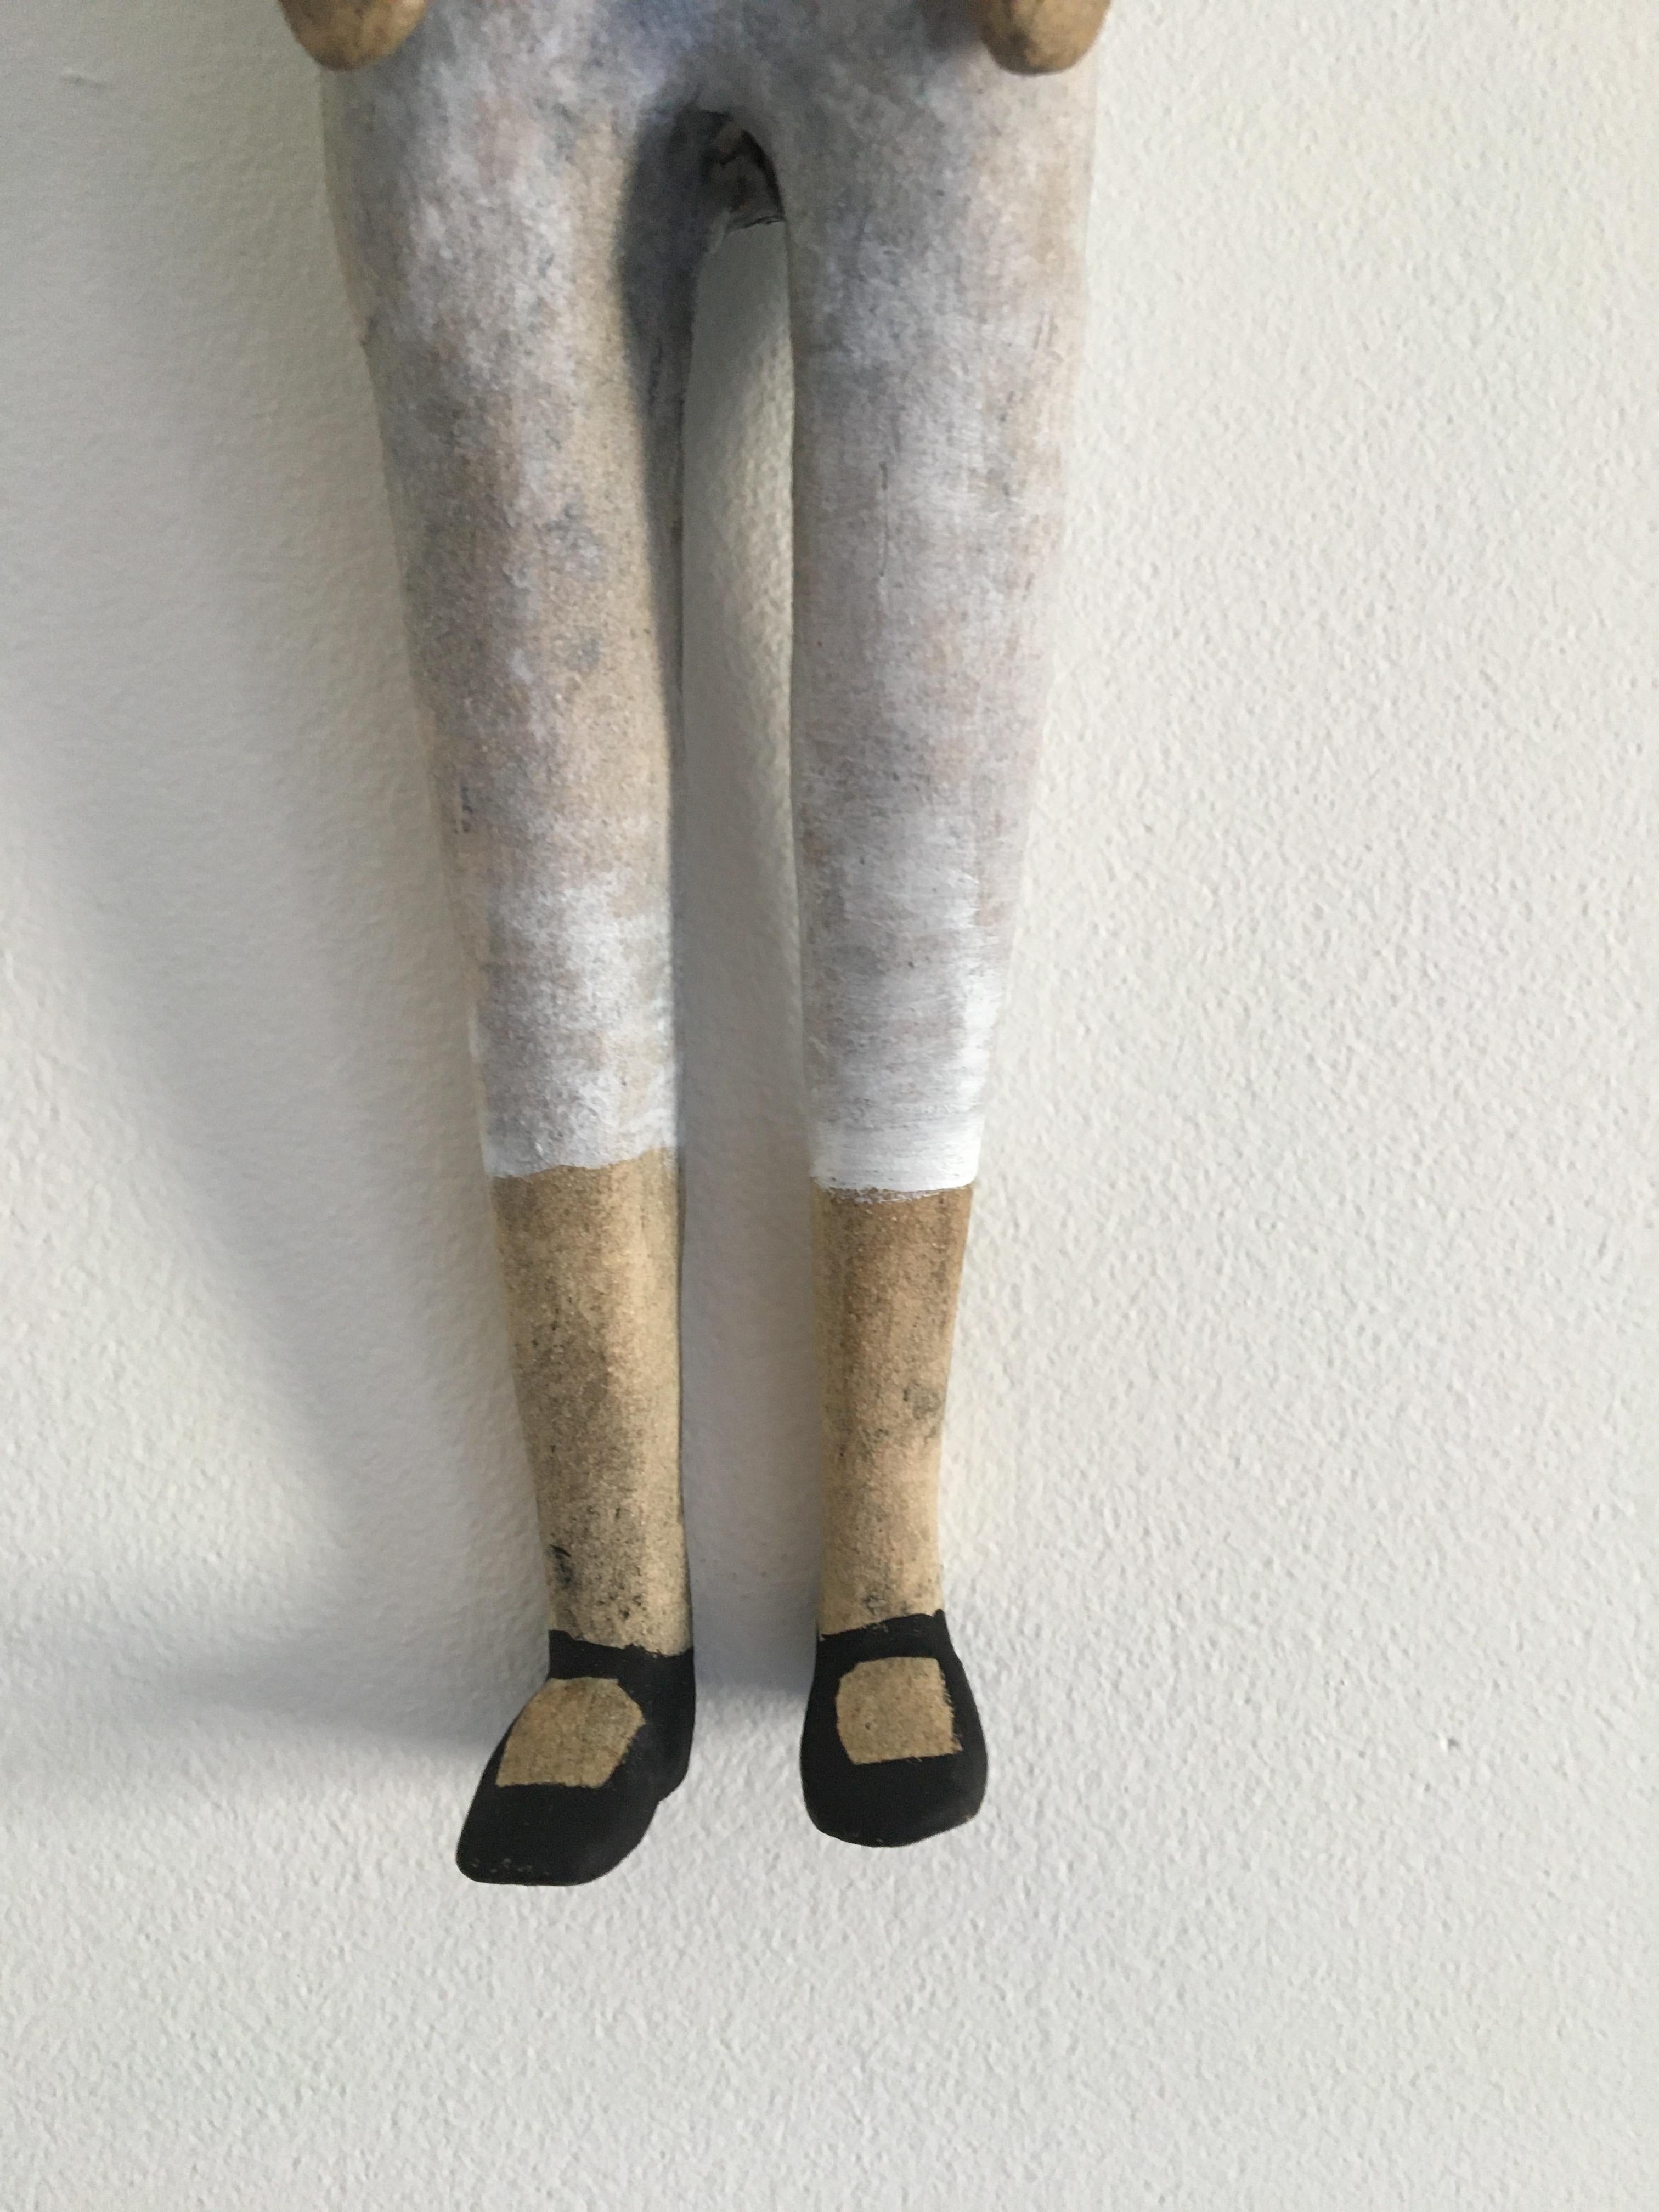 Ashley is an American artist living in Savannah Georgia. Her work and practice is primarily mixed media paintings and sculptures with a focus on ceramics. “ My work begins with the subtle impressions left from  living a life” Through Emotionally